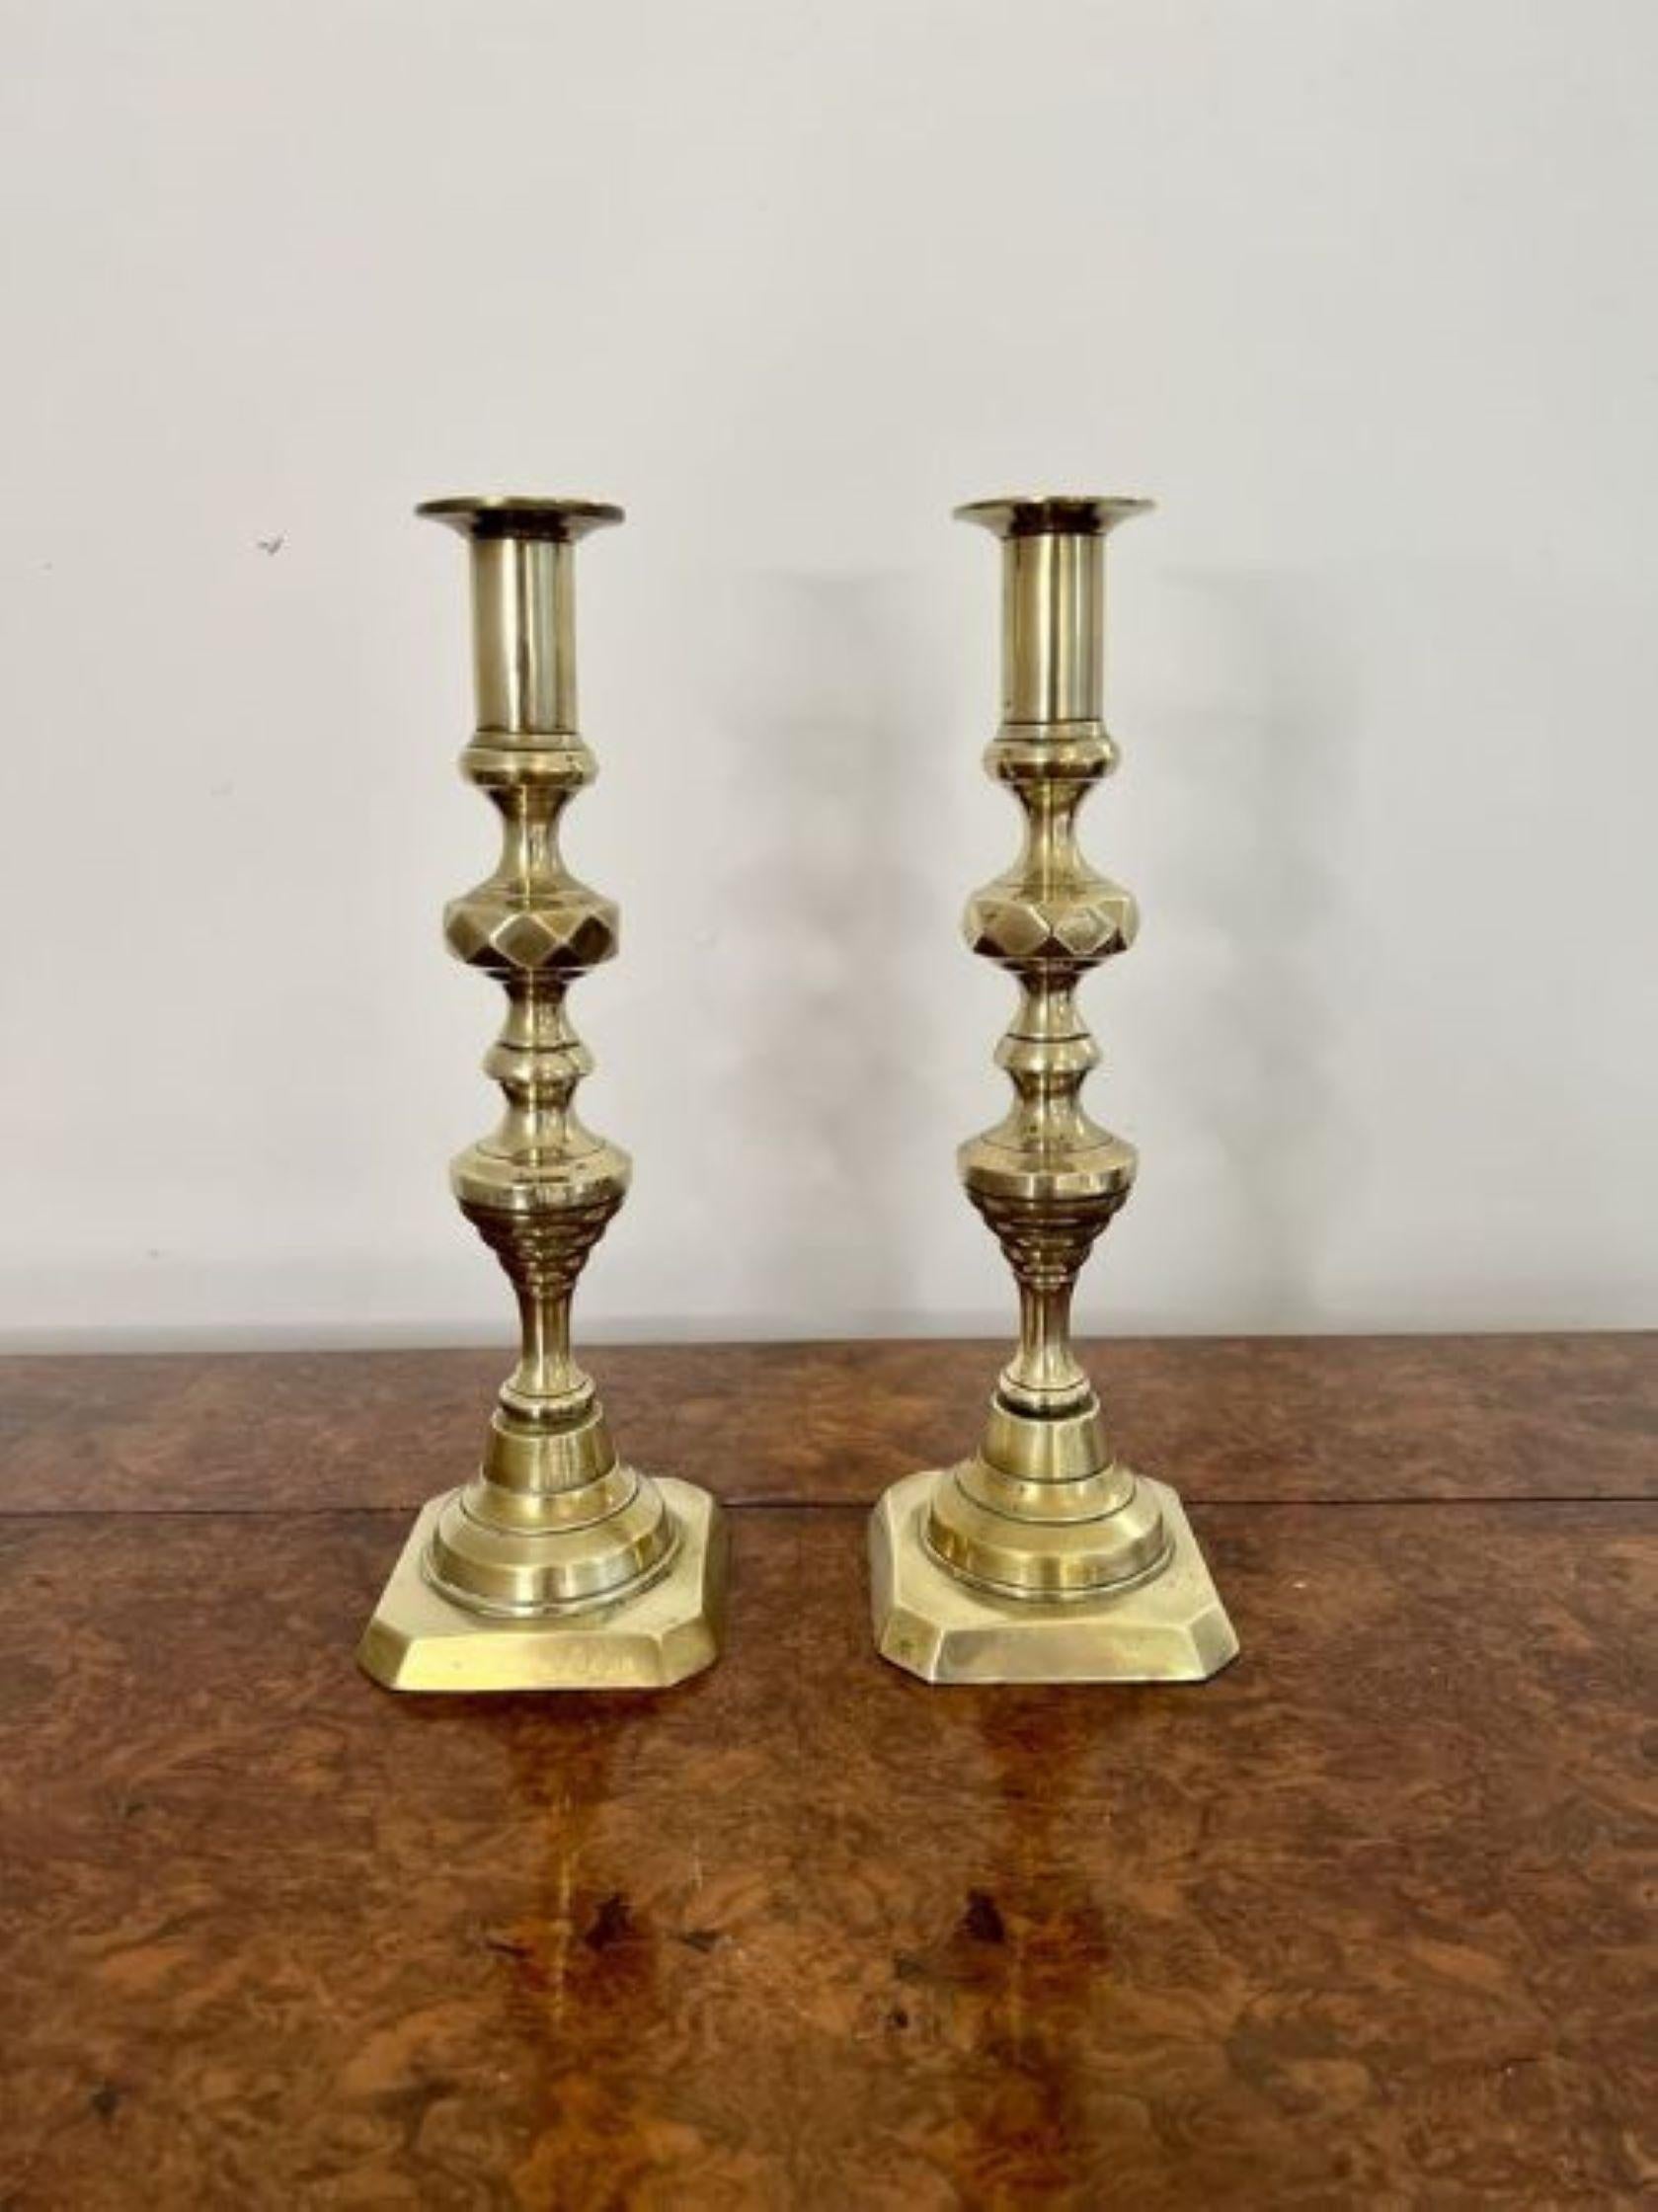 Pair of antique Victorian quality brass candlesticks having a quality pair of brass Victorian candlesticks with a turned shaped columns on a stepped base.